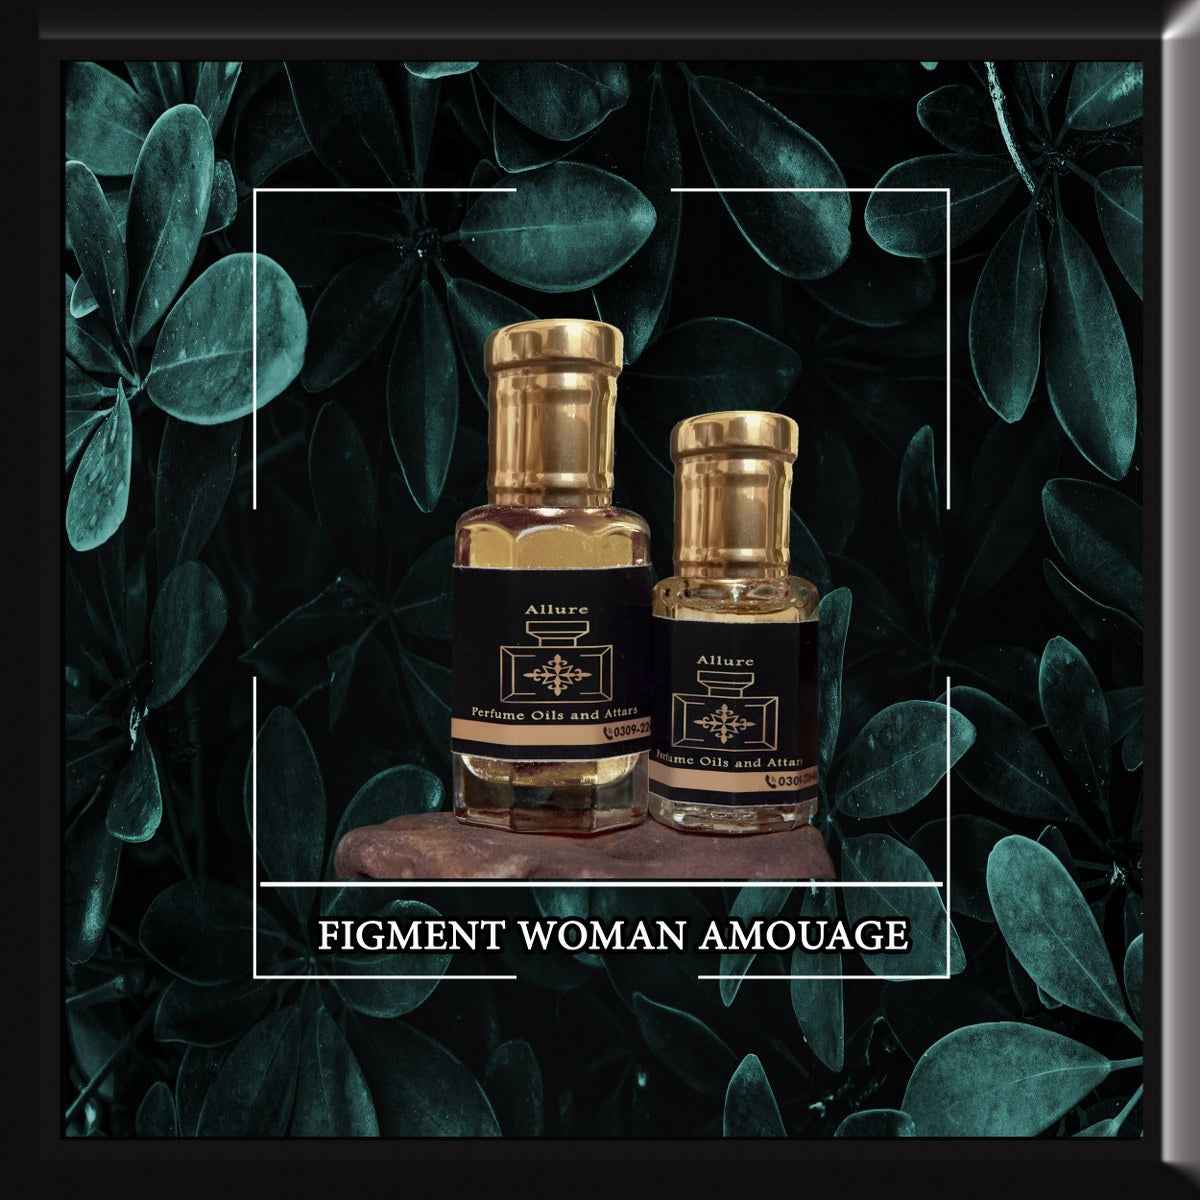 Figment Woman Amouage Attar in high quality